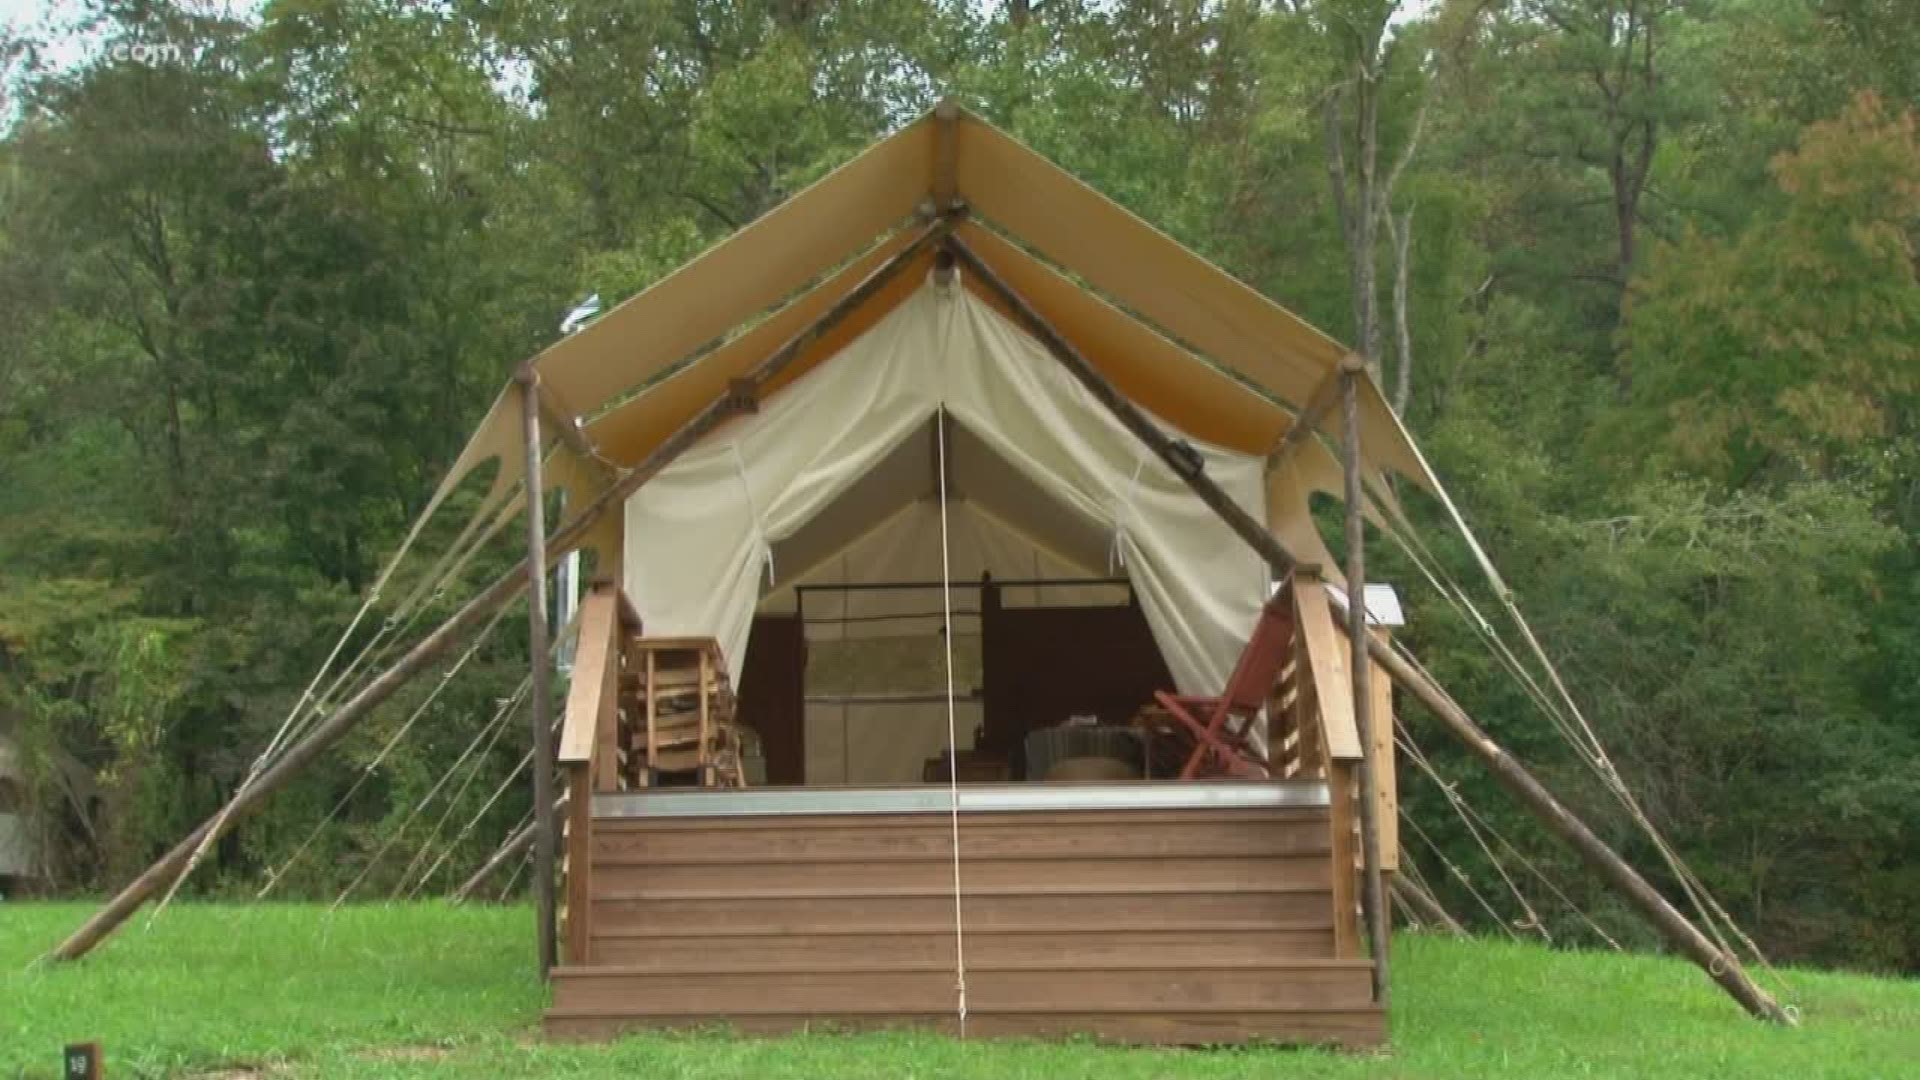 The Smokies has a new "Glamp Site" thanks to "Under Canvas", a glamping business now open in Pigeon Forge.
Oct. 2, 2018-4pm